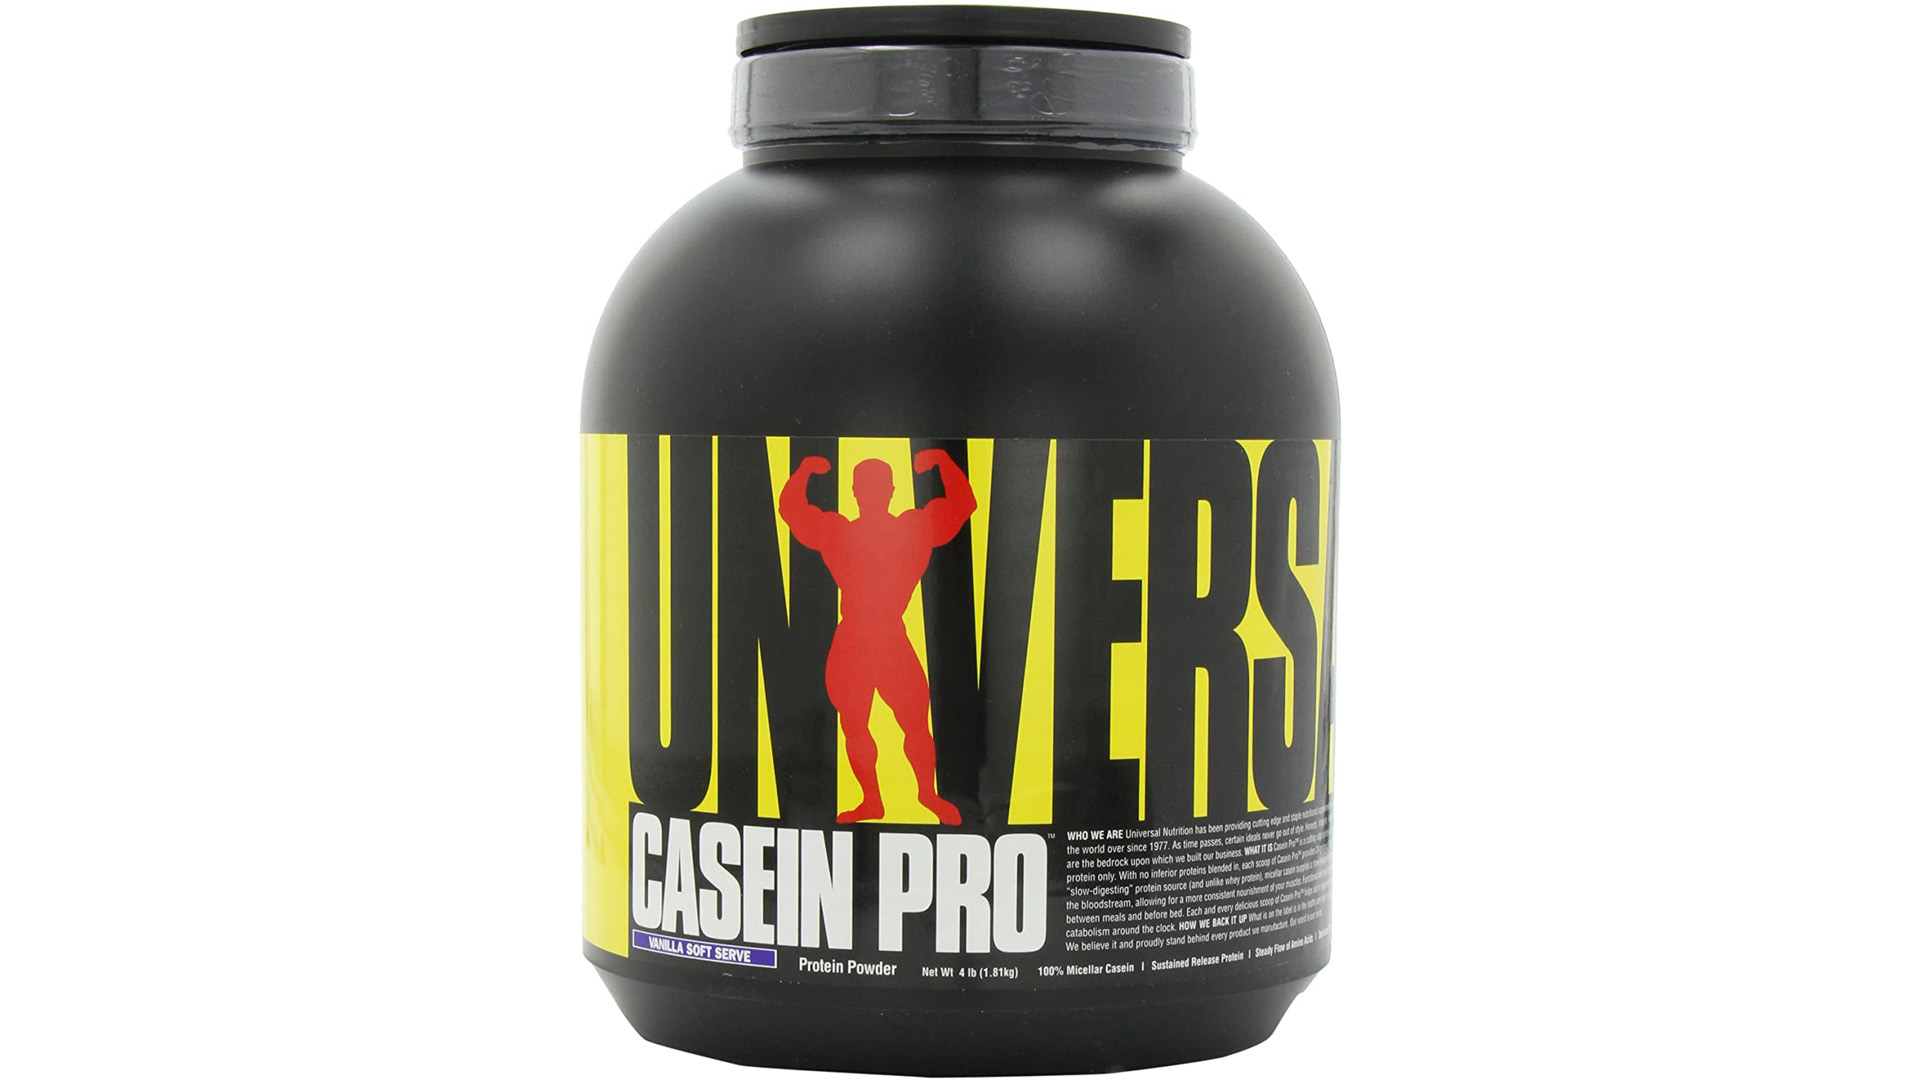 Casein Pro by Universal Nutrition